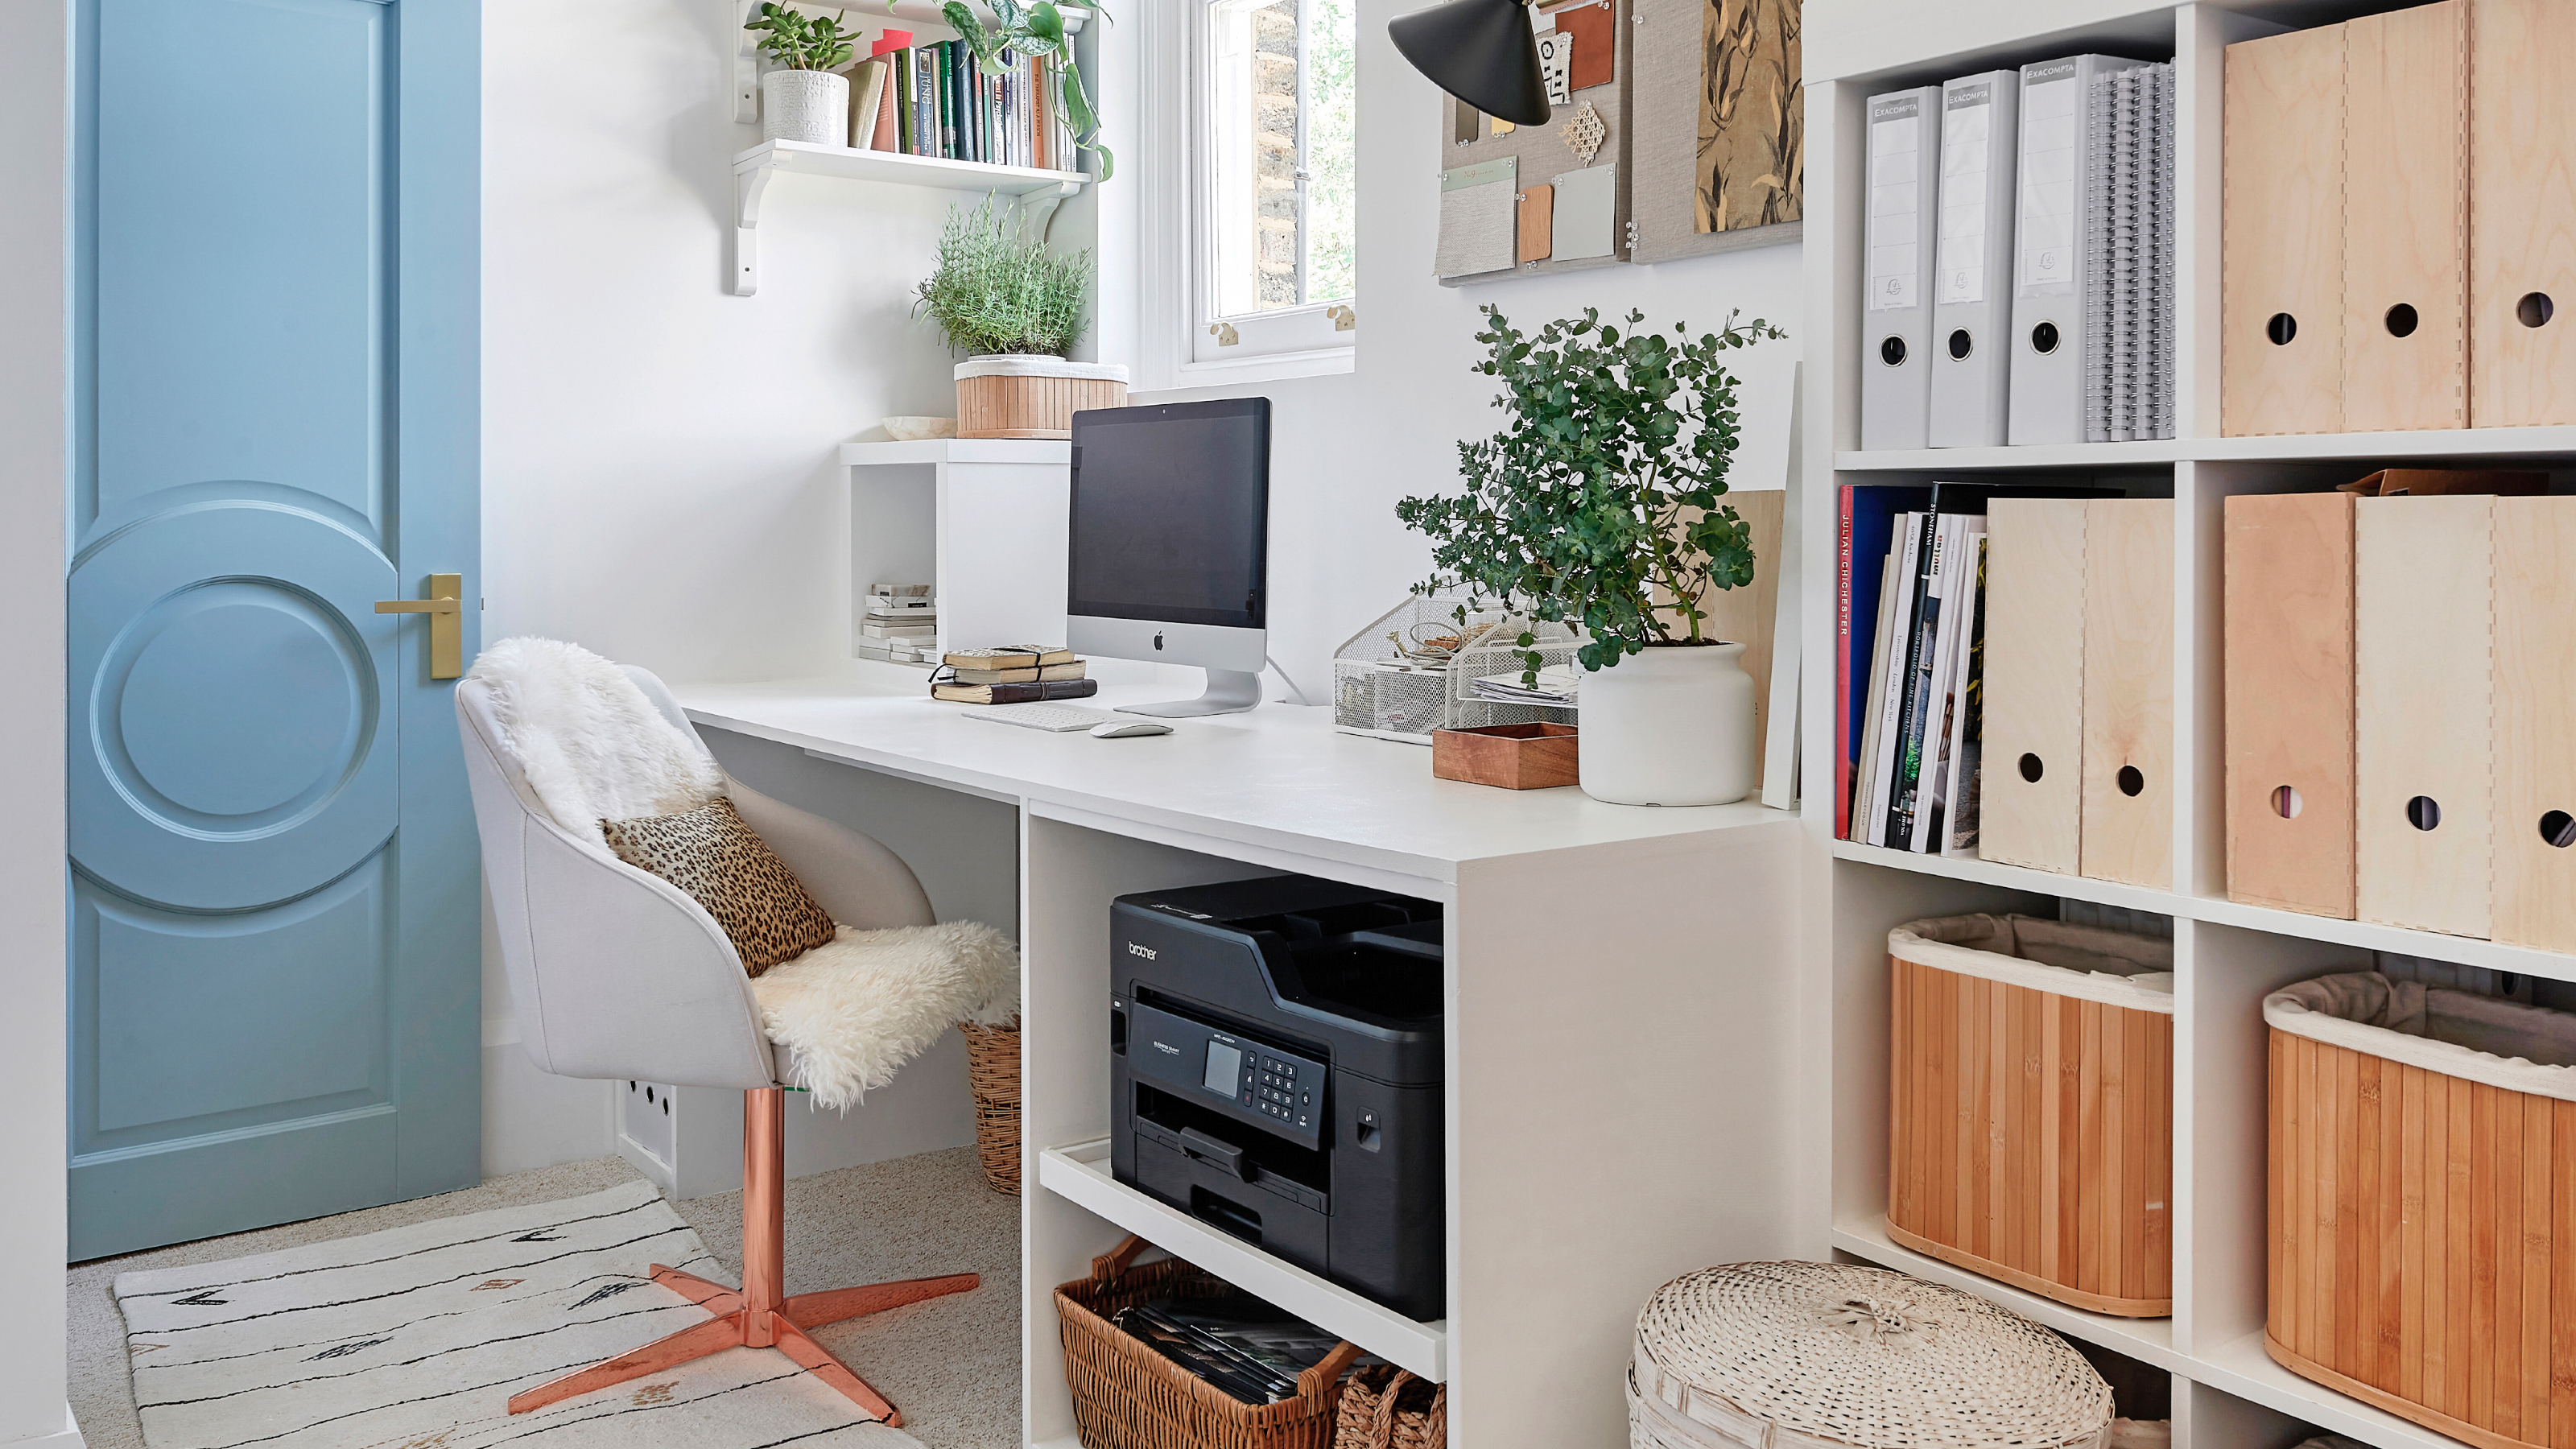 Design the Home Office of Your Dreams With Chatbooks - Home Office Decor  Photos